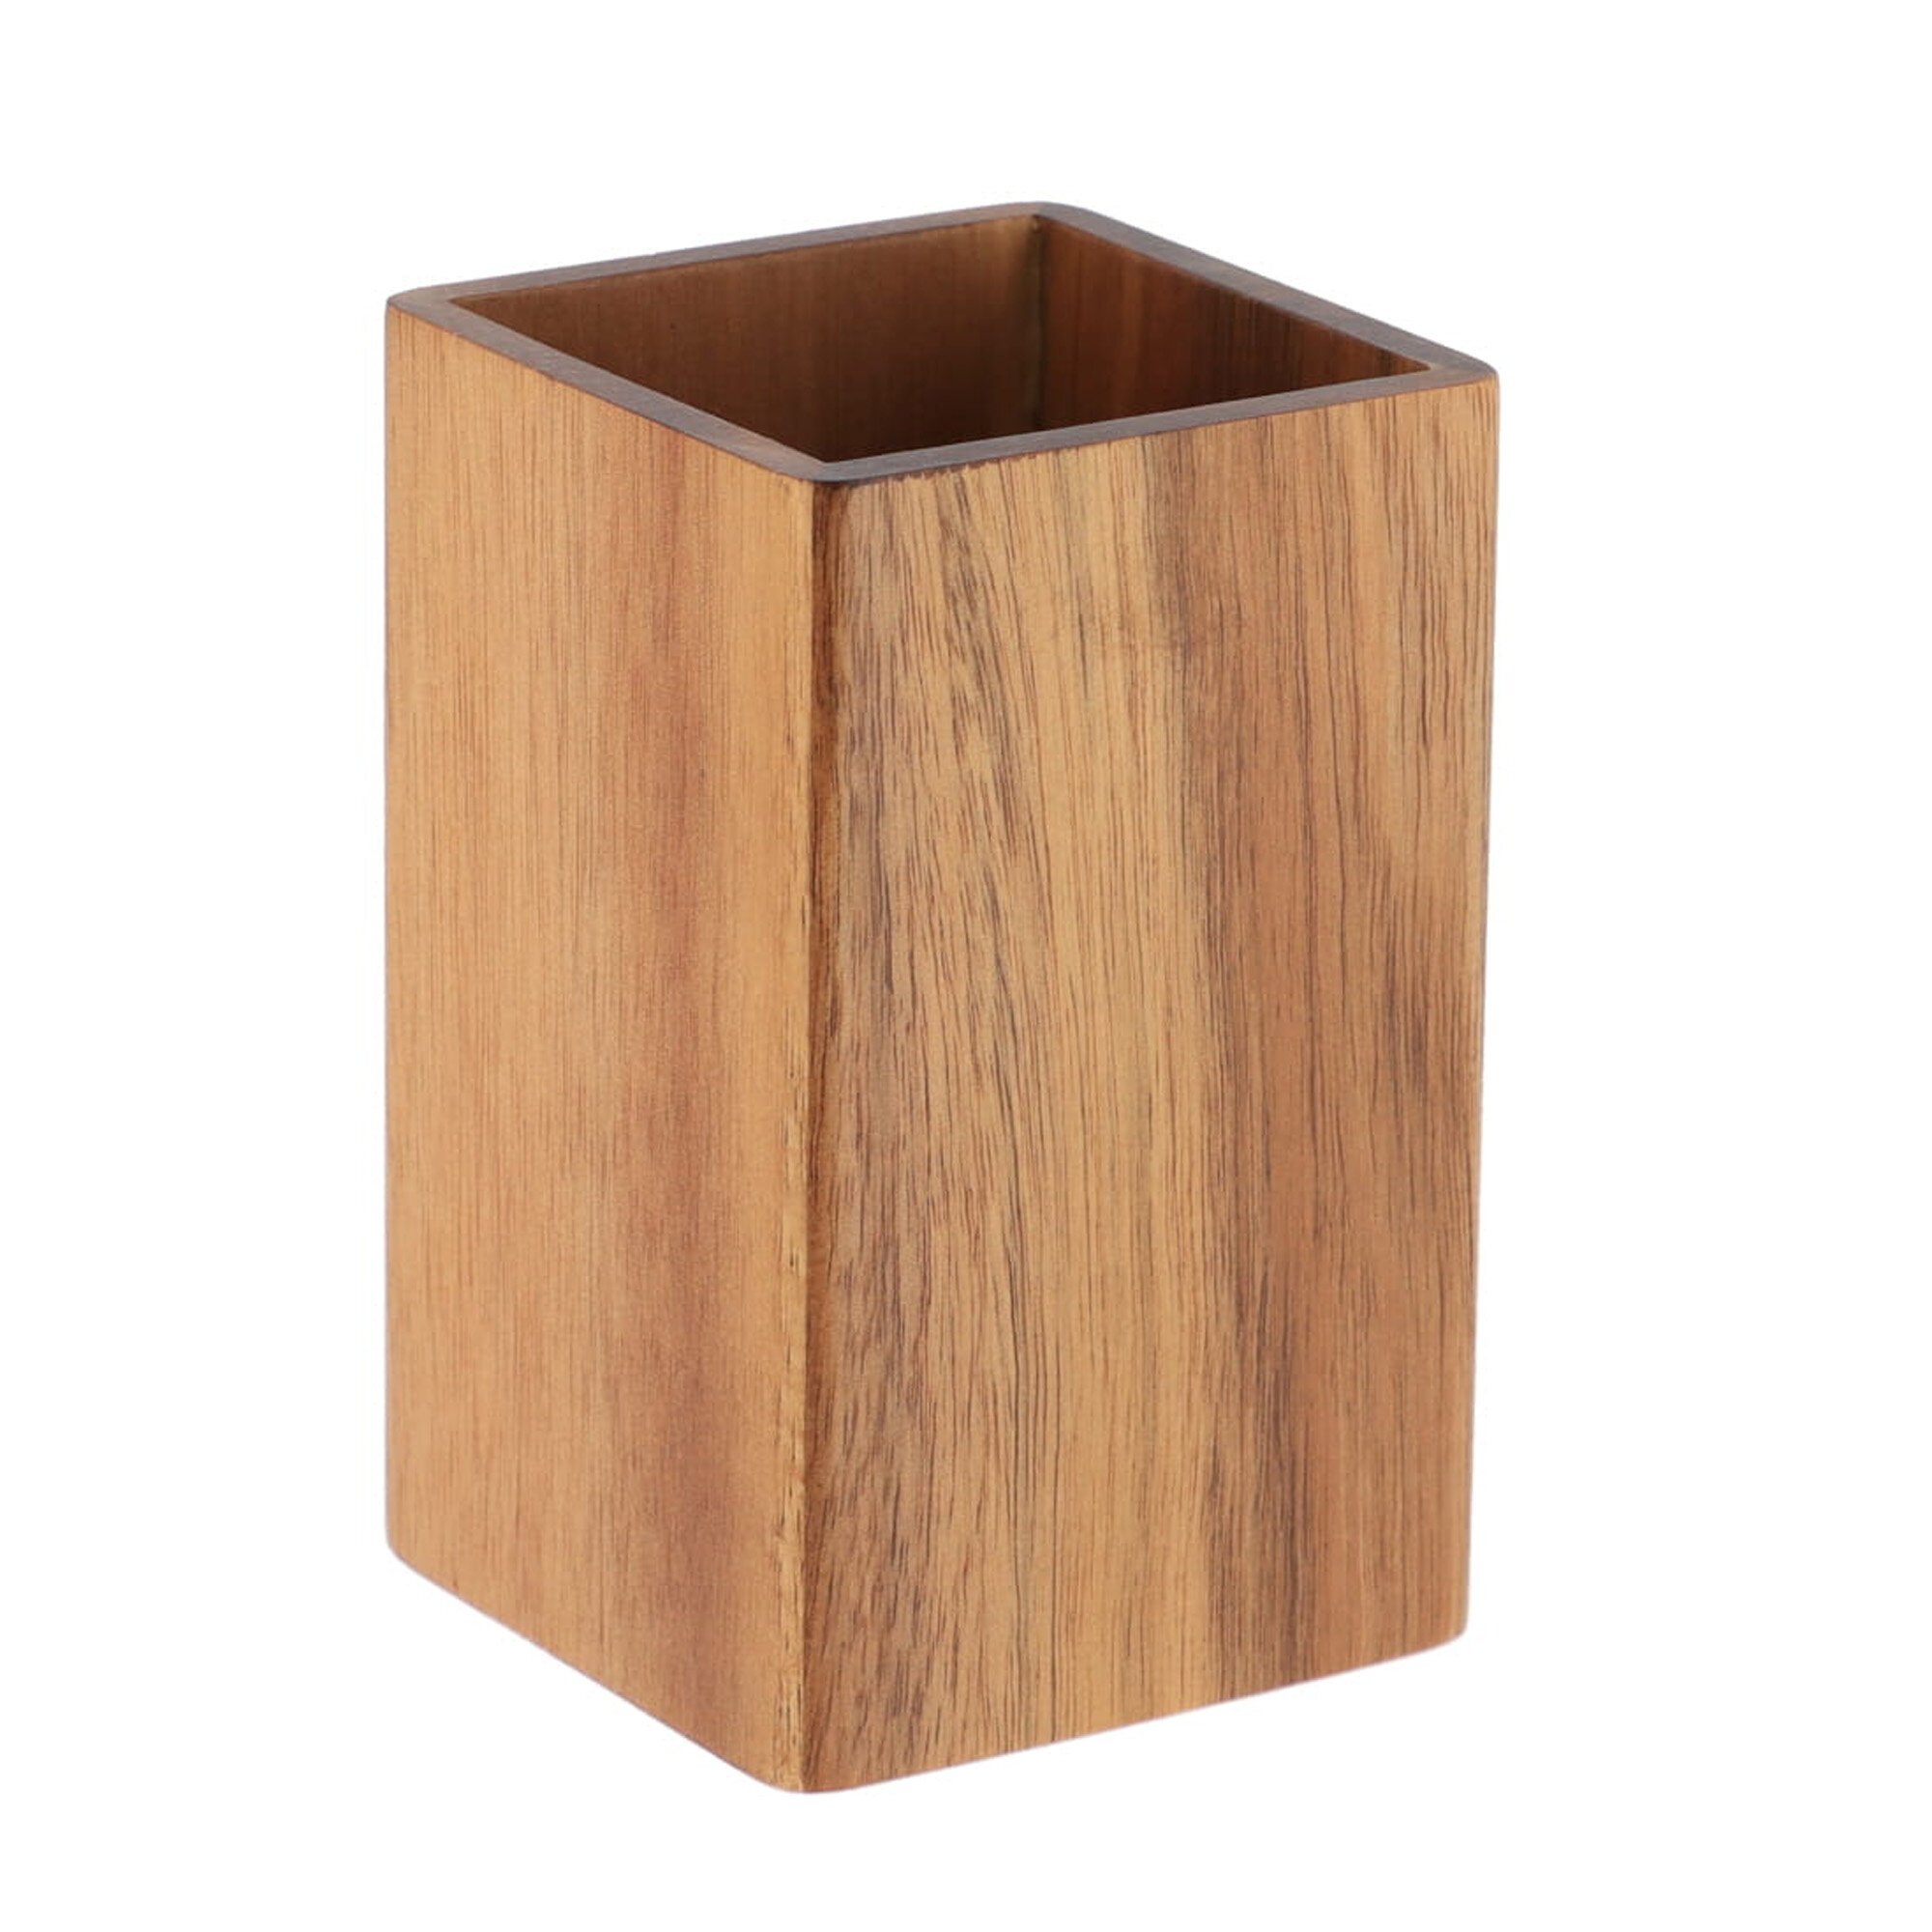 Evideco Toilet Paper Holder Stand Cabinet Elements Acacia - Gray Wood